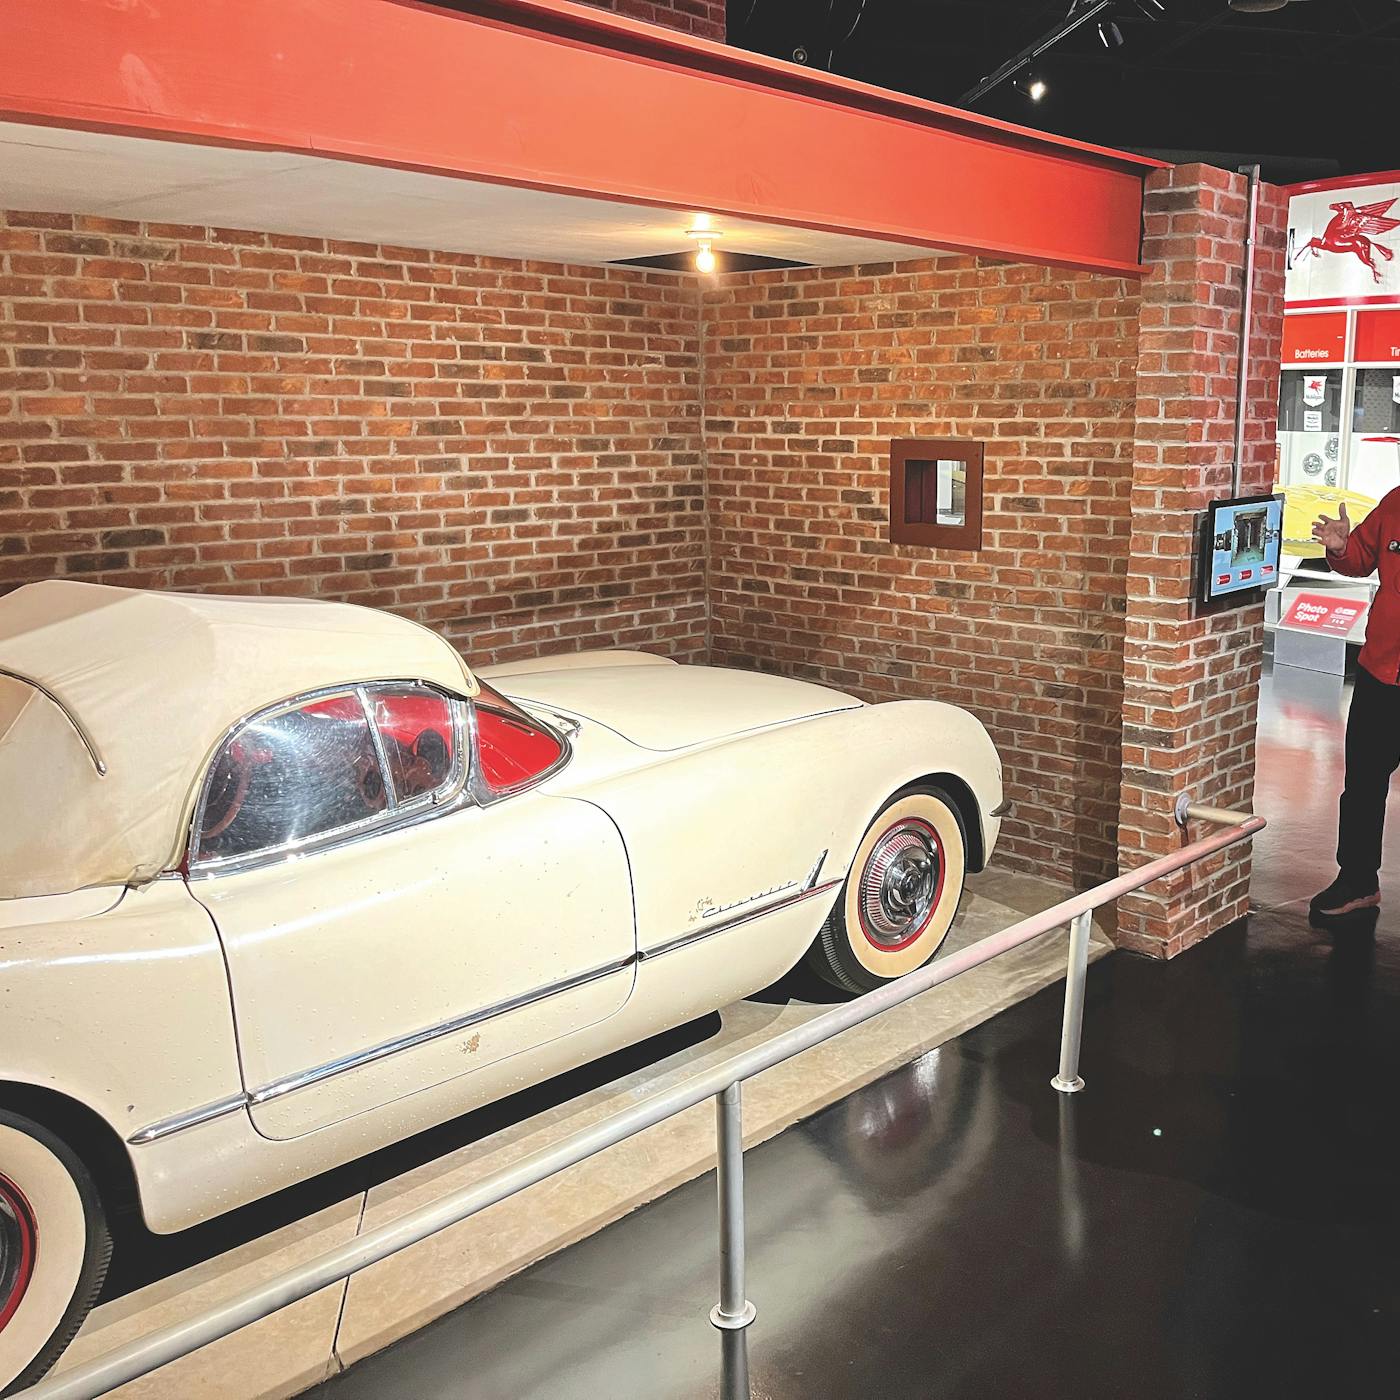 Vintage white Corvette on display at National Corvette Museum in Bowling Green, Kentucky (photo courtesy of National Corvette Museum))